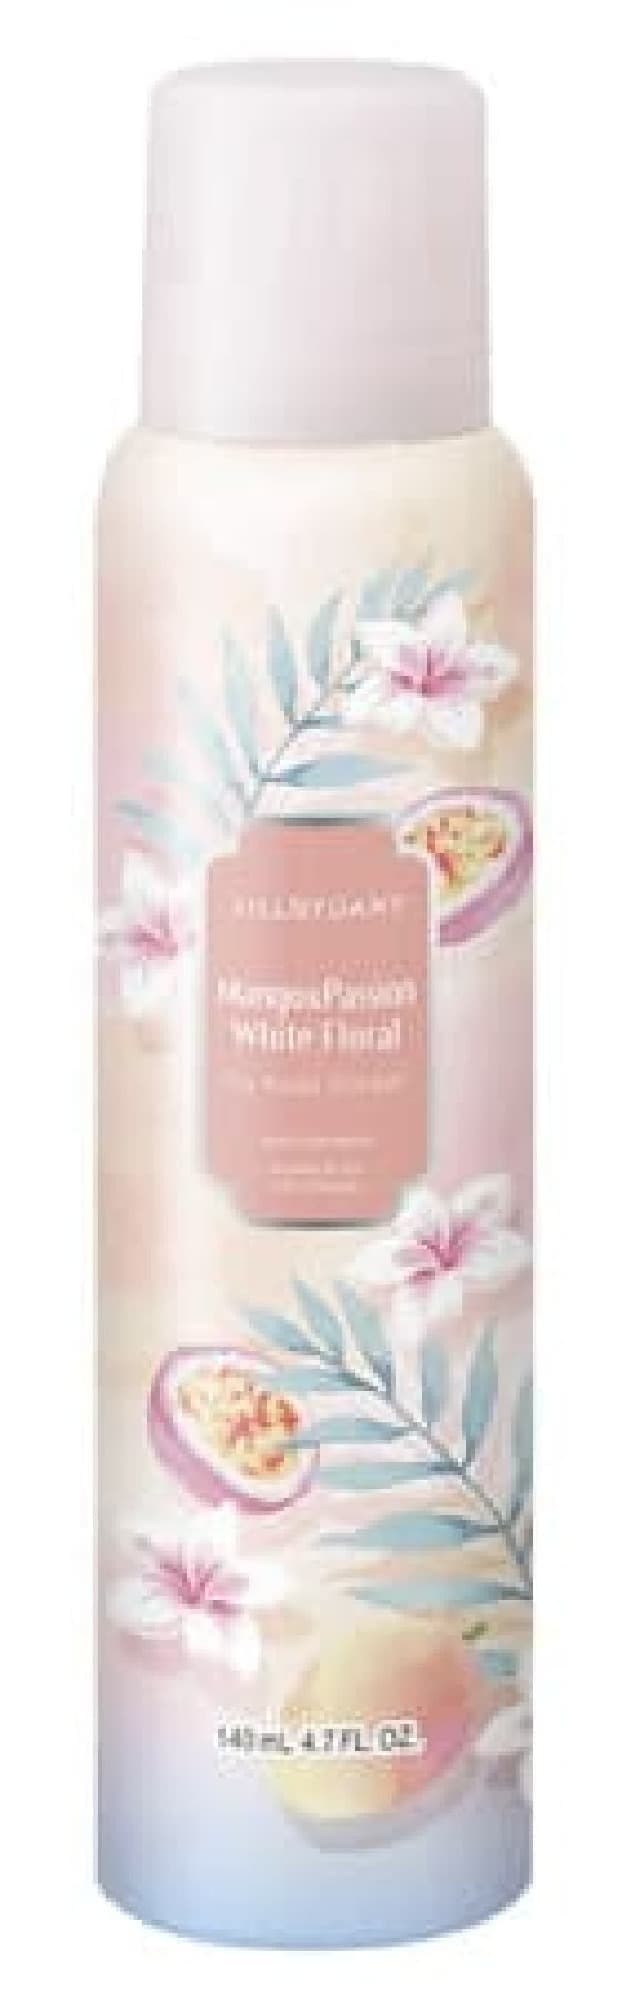 Jill Stuart "Icy Head Shower Mango & Passion White Floral" summer only! Mist lotion and sunscreen spray also available